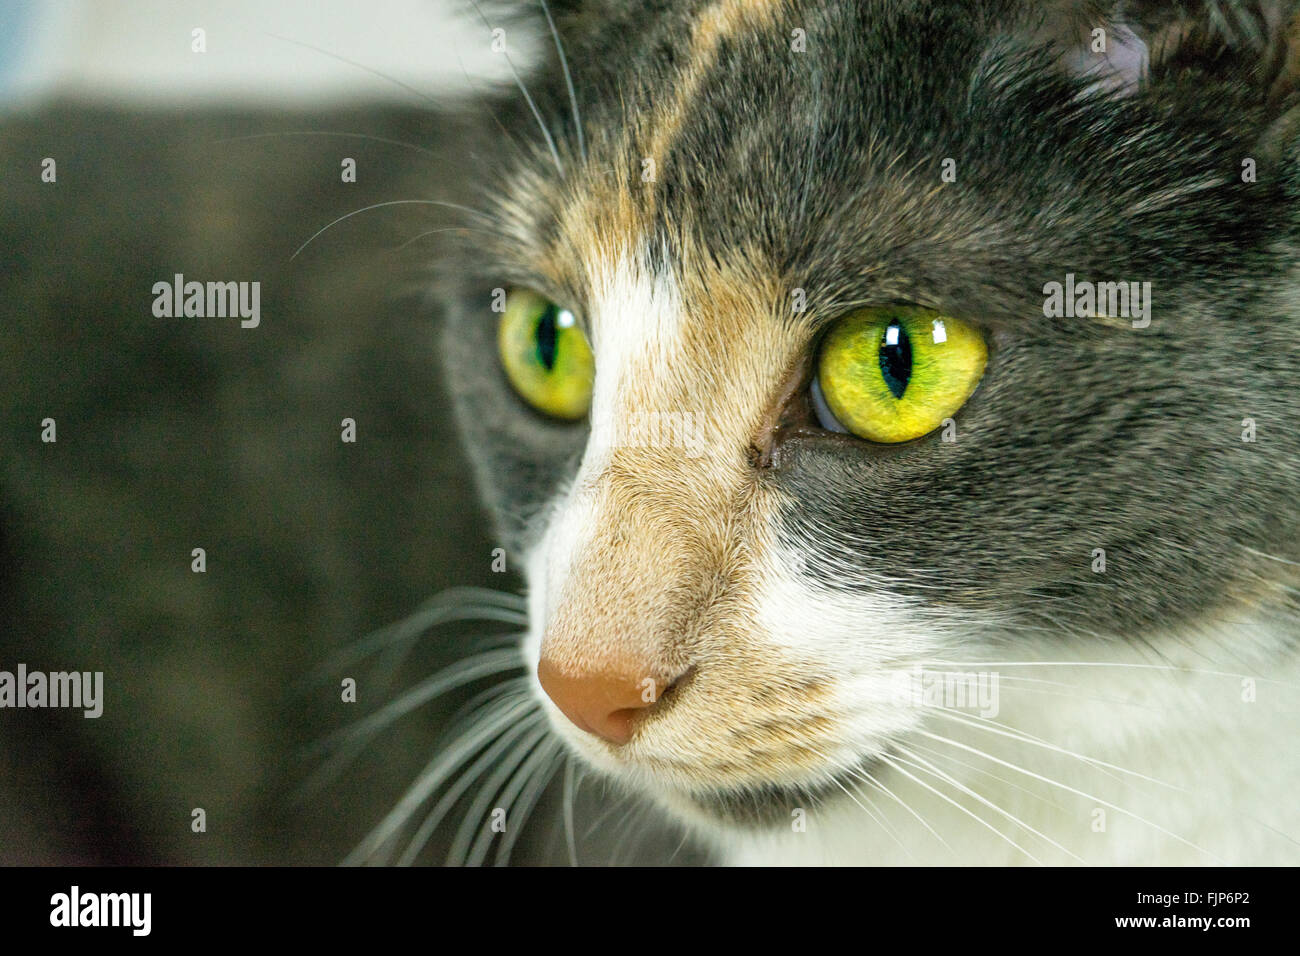 Closeup of cute grey, white and beige cat showing yellow eyes and whiskers Stock Photo